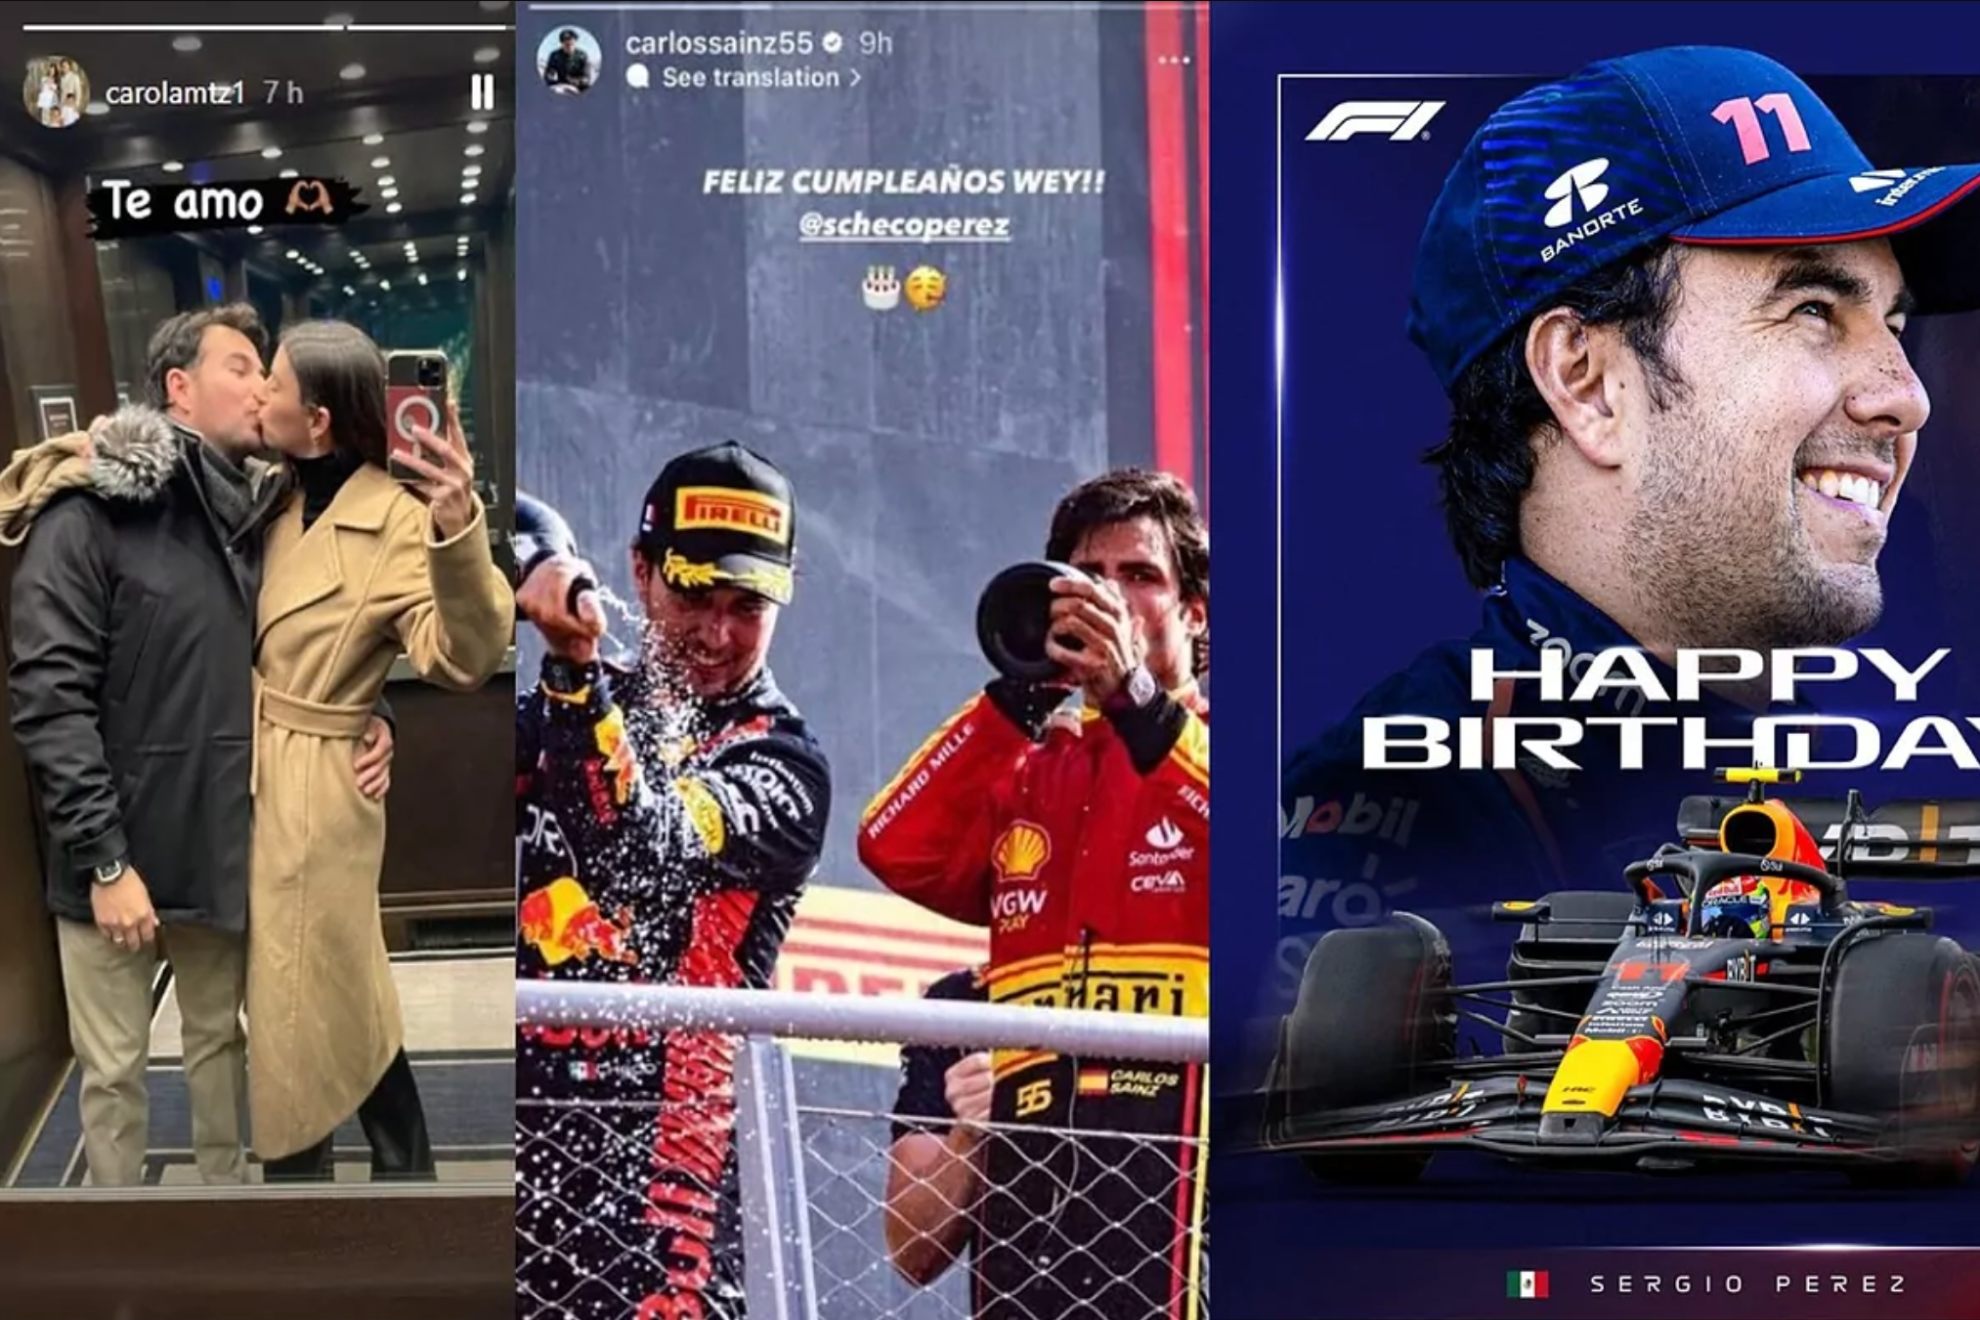 Checo Perez celebrates his 34th birthday with greetings from F1, Red Bull, his loved ones and even from rivals